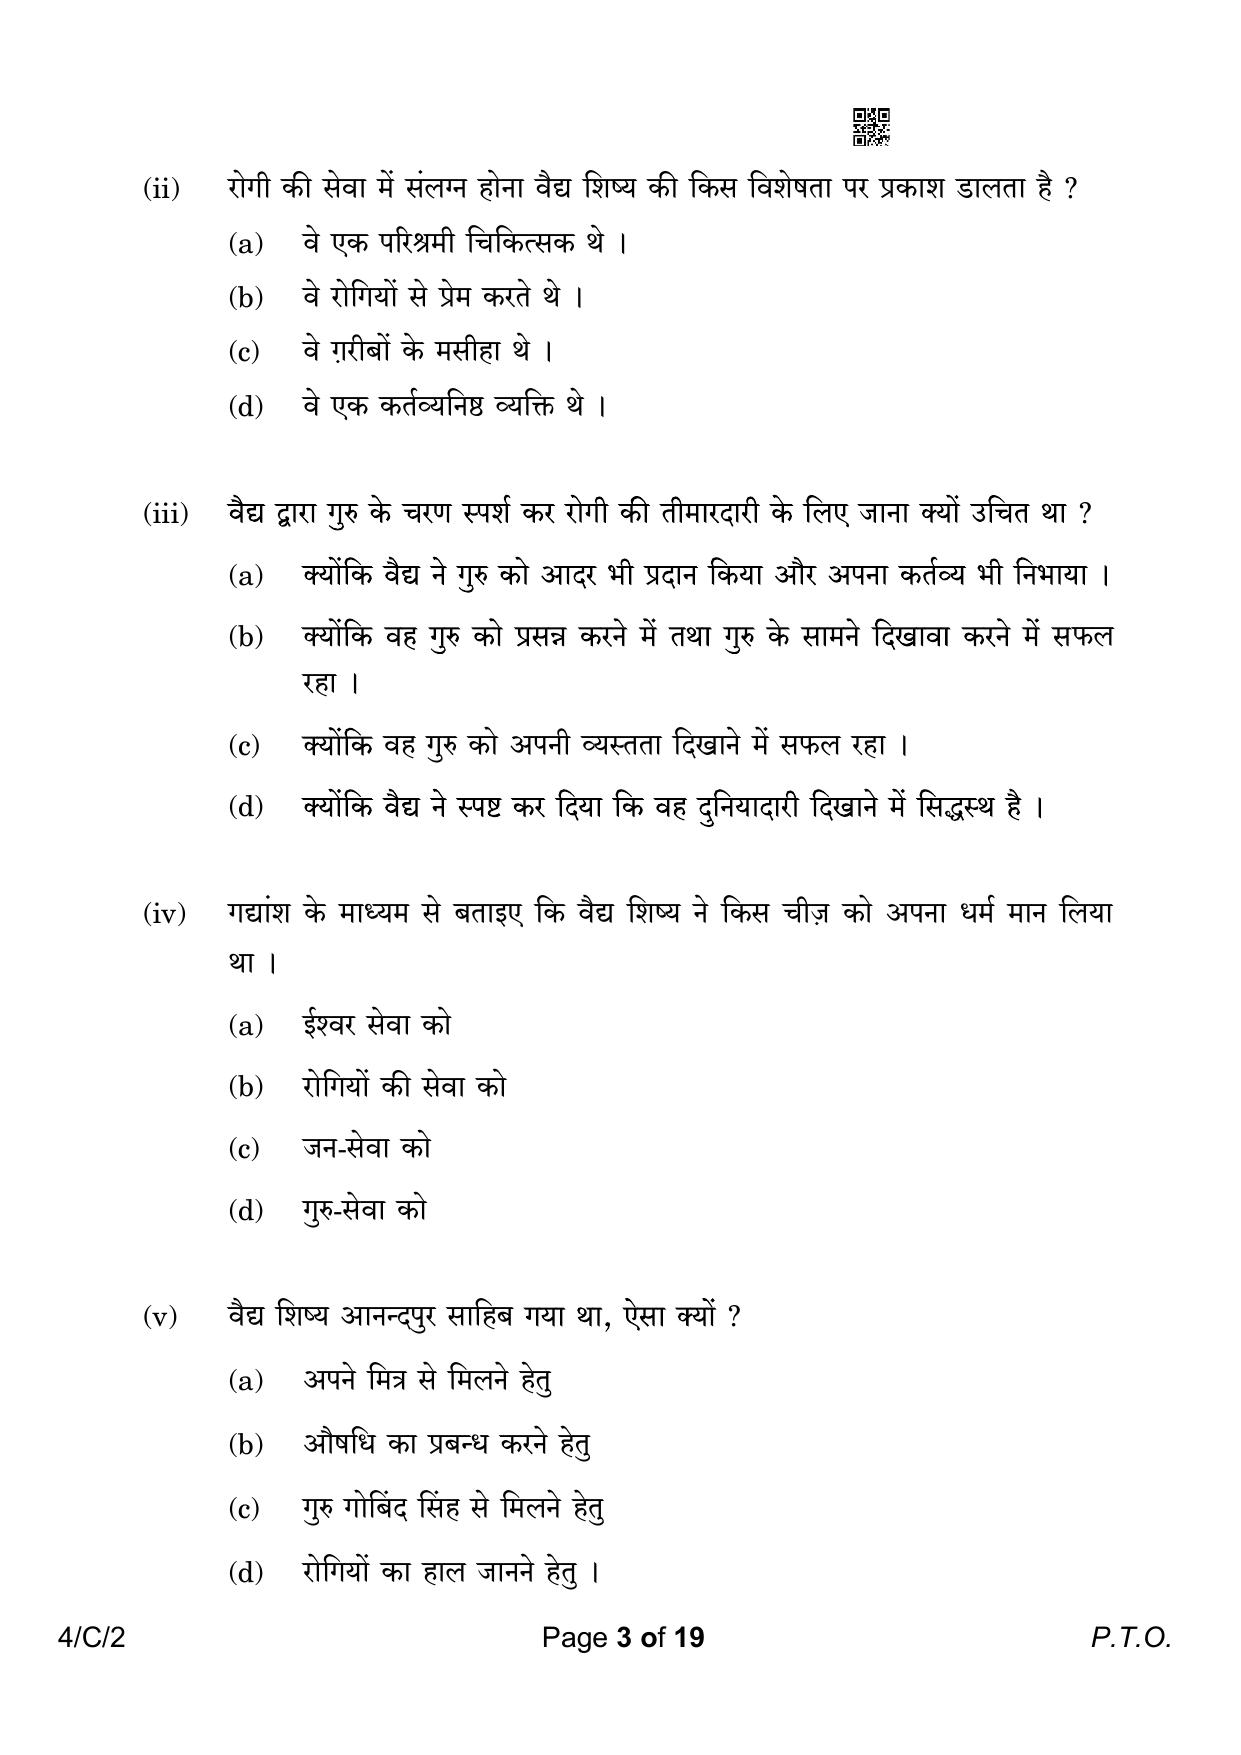 CBSE Class 10 4-2 Hindi B 2023 (Compartment) Question Paper - Page 3